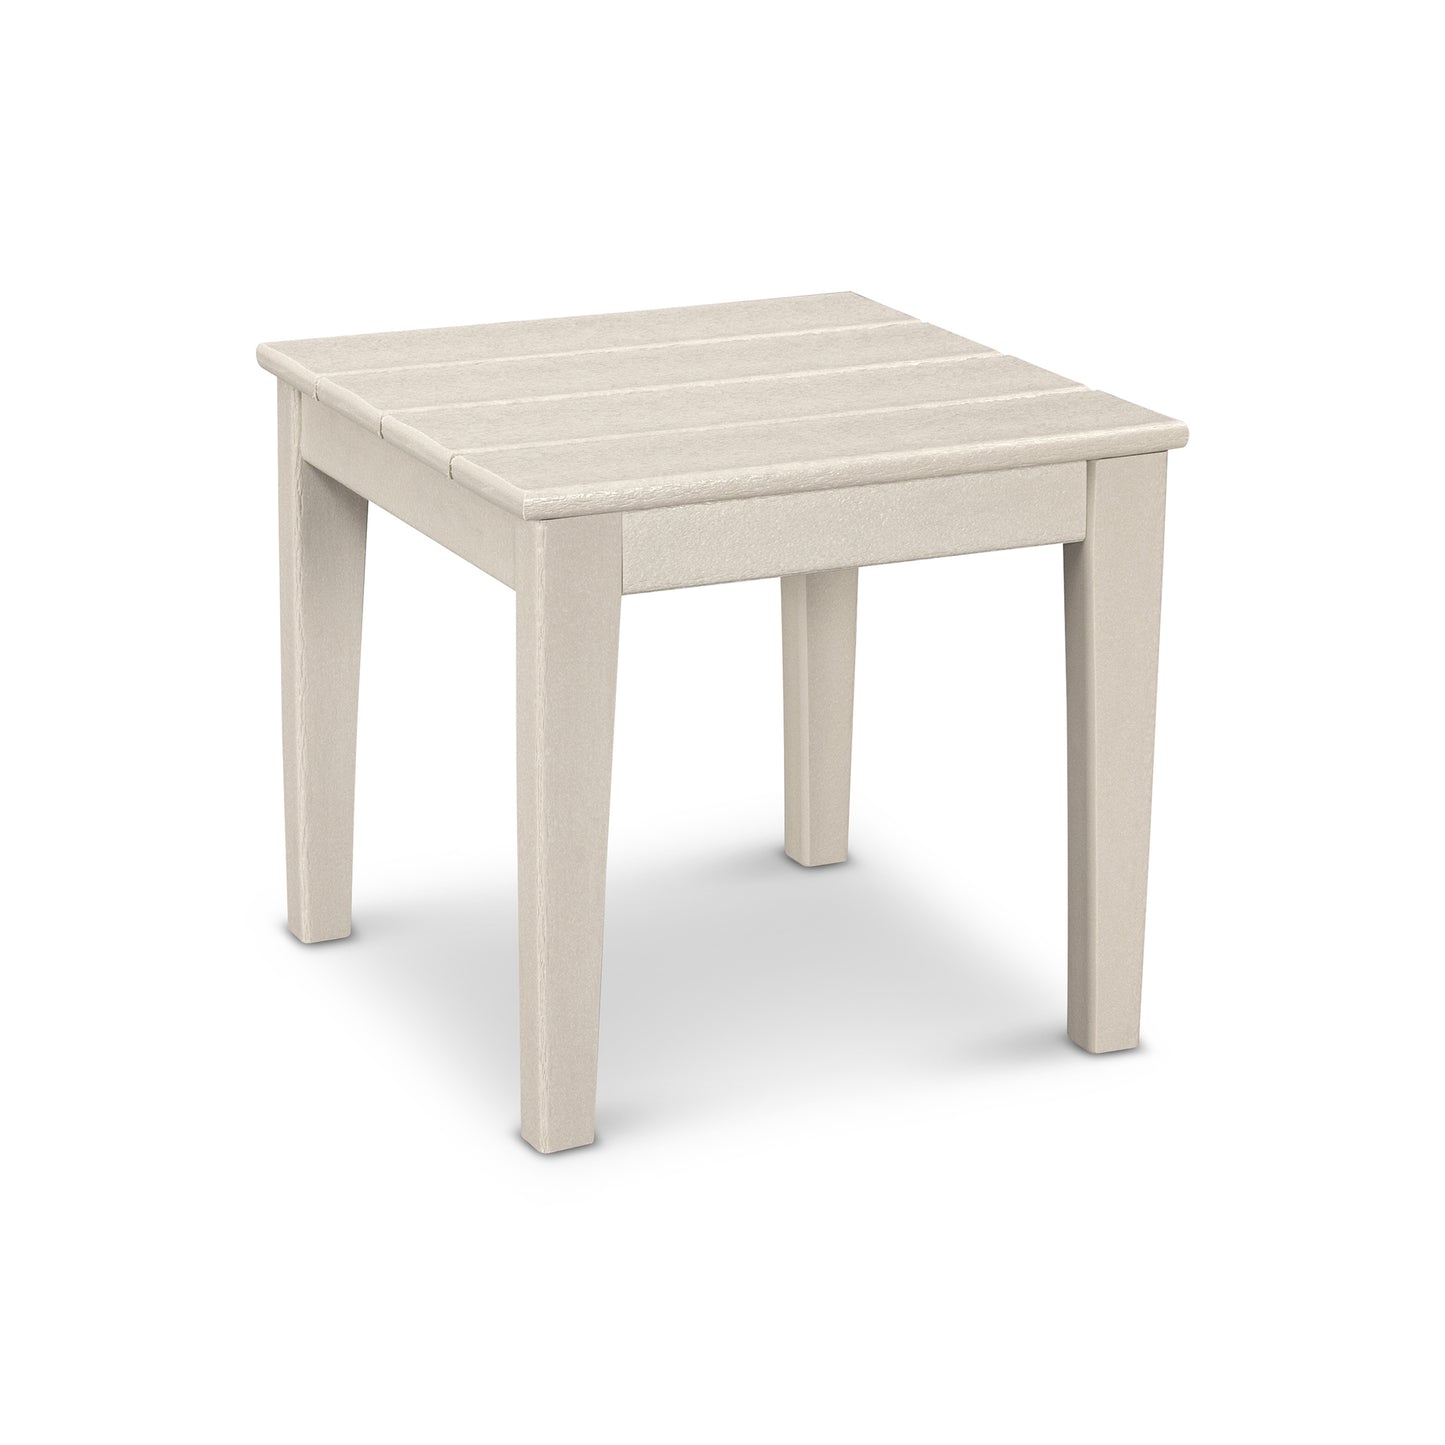 A simple beige POLYWOOD Newport 18" End Table with a textured surface, isolated on a white background.